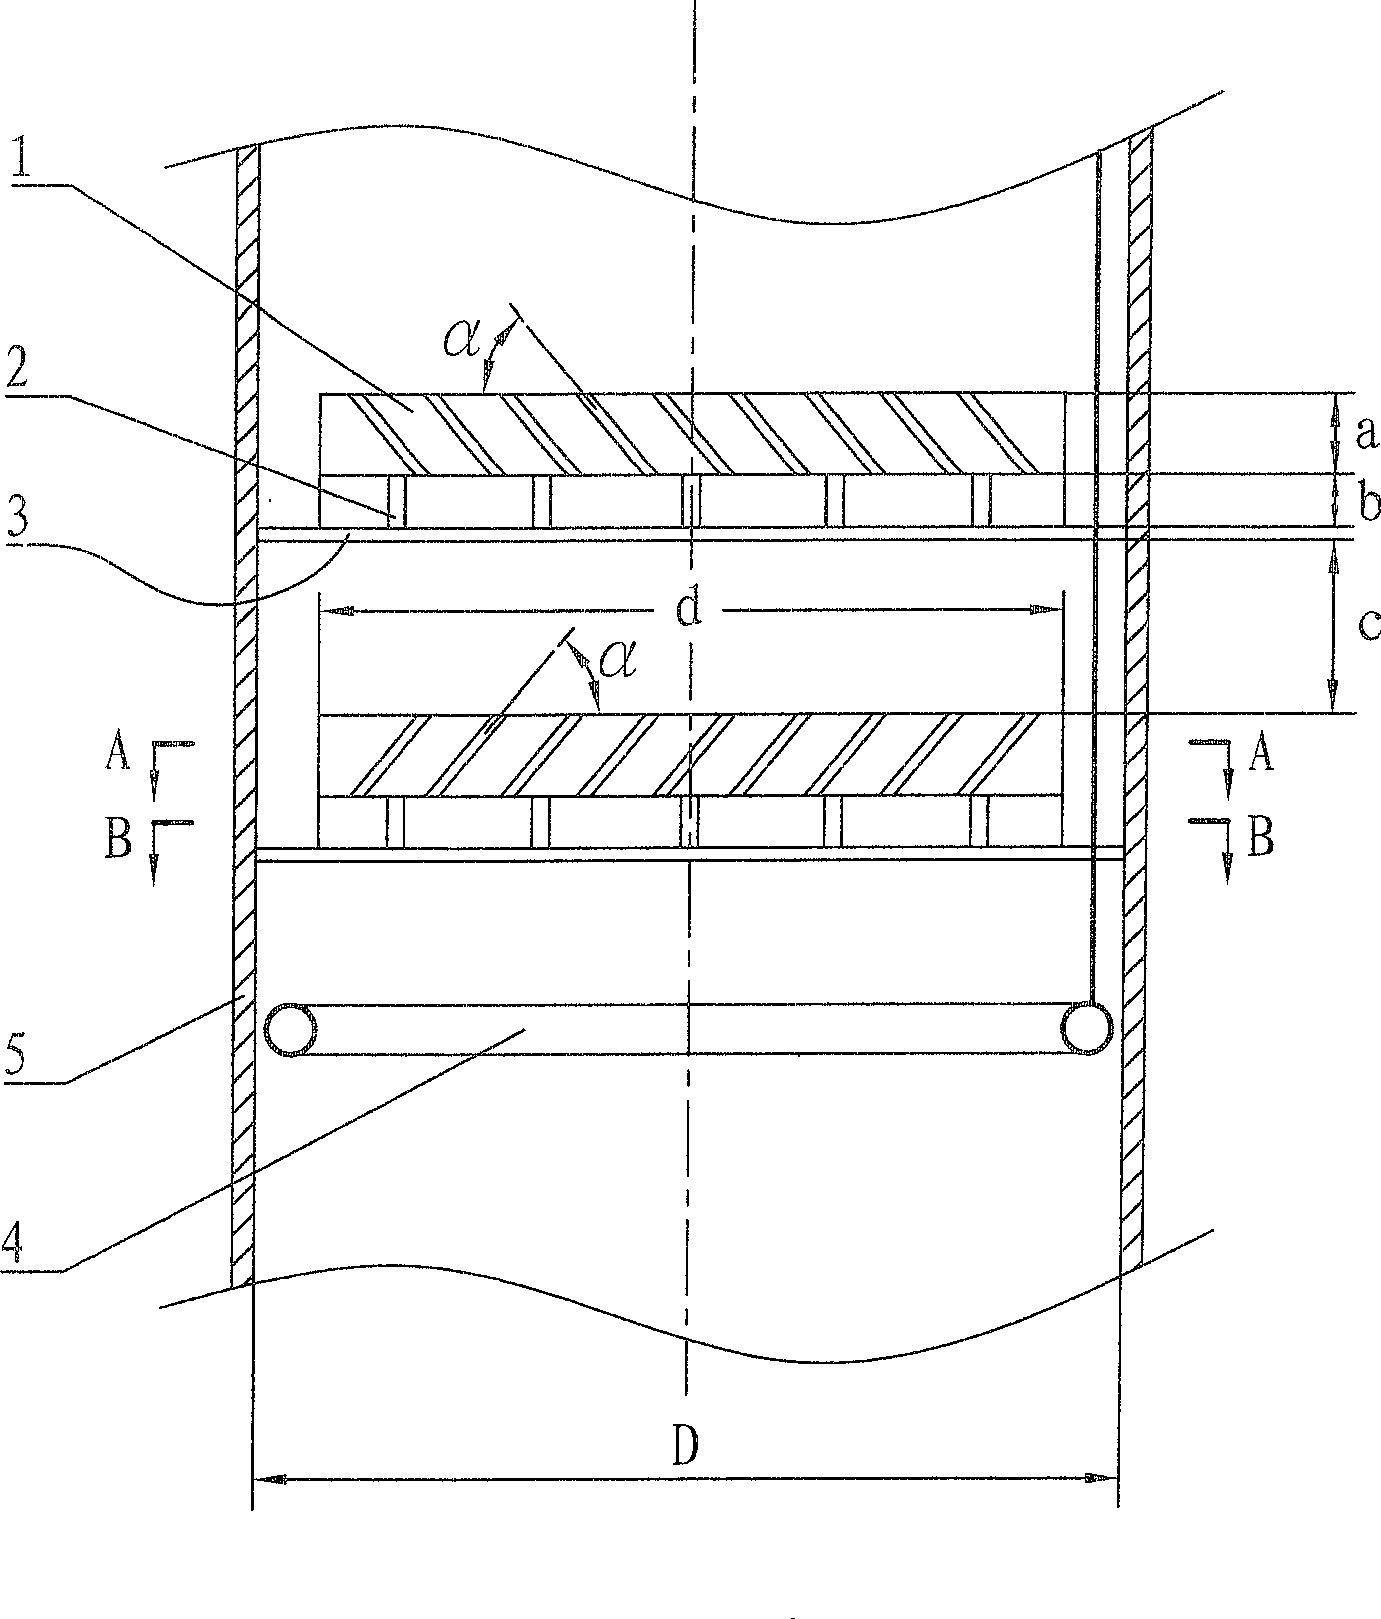 Fluidised bed gas-solid contacting device